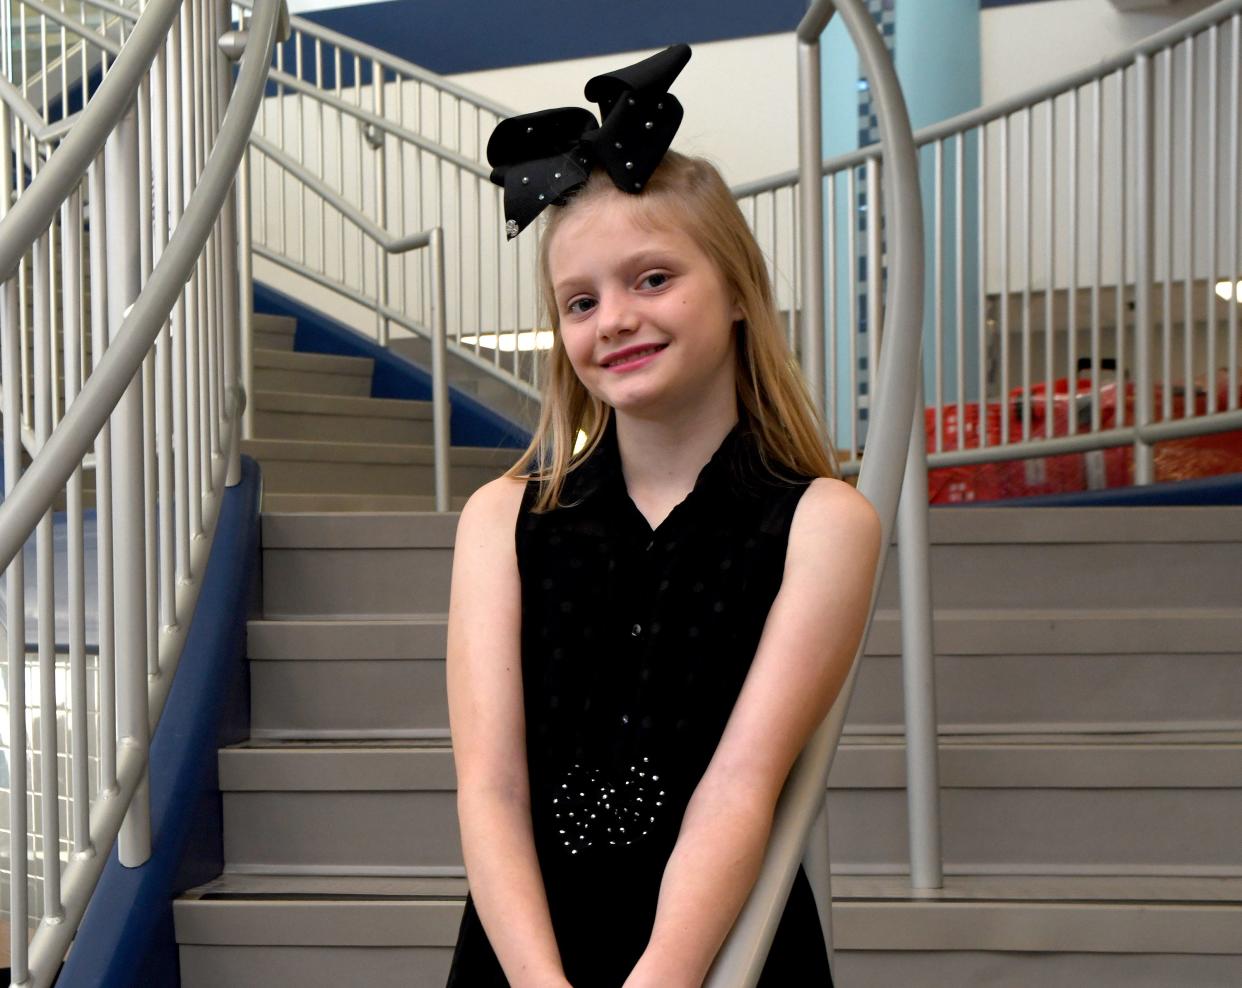 Audree Stucin, a fifth-grader at Louisville Elementary School, is The Alliance Review's Robertson Kitchen & Bath Kid of Character for October. The 11-year-old was photographed Wednesday, Oct. 11, 2023, at school.